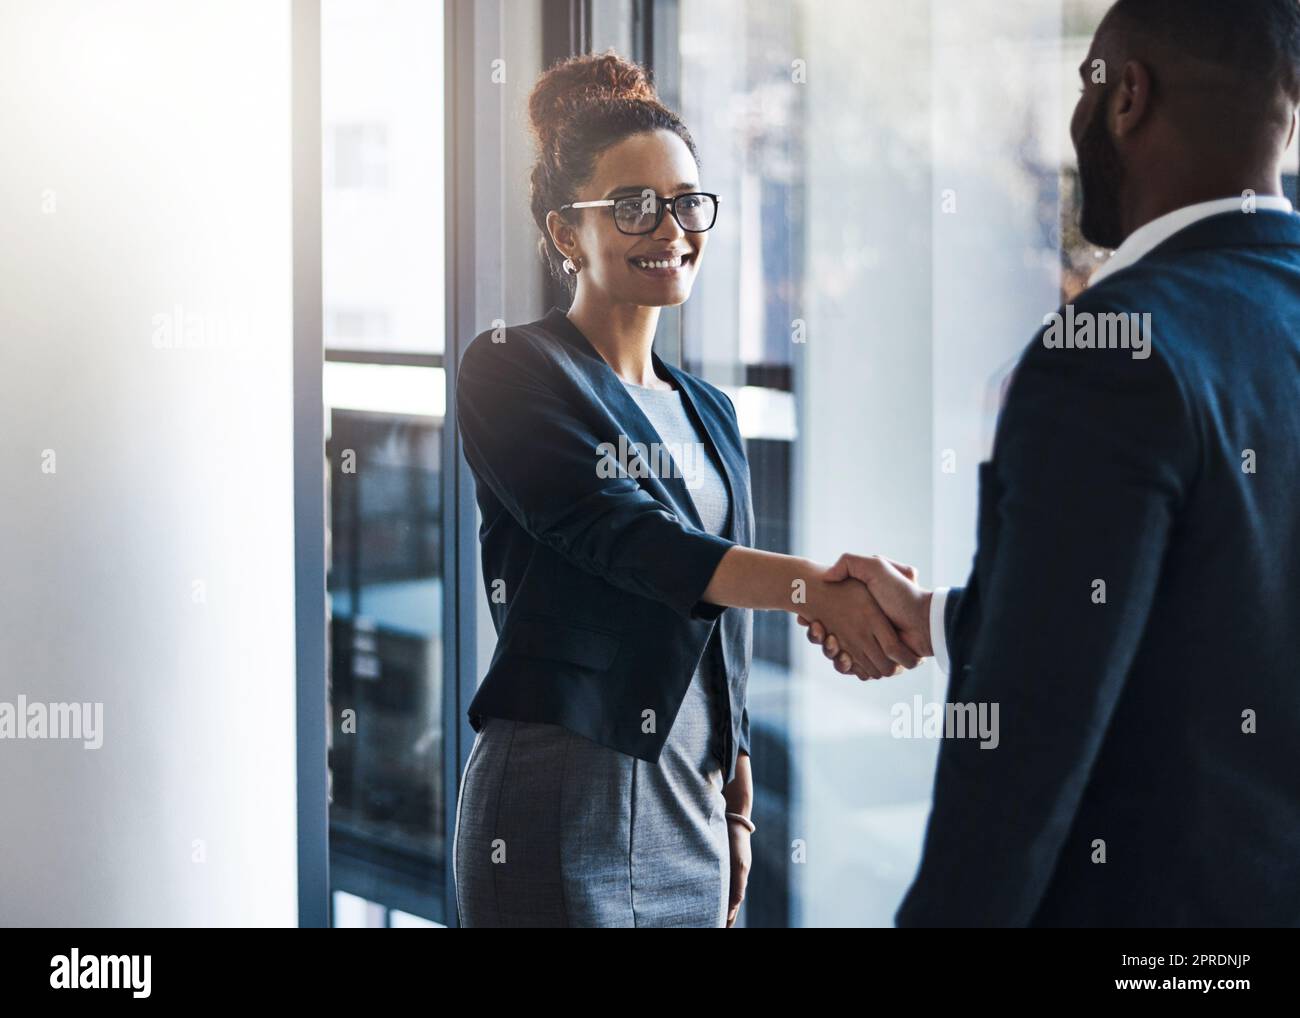 Im happy we could finally meet face to face. two businesspeople shaking hands in an office. Stock Photo